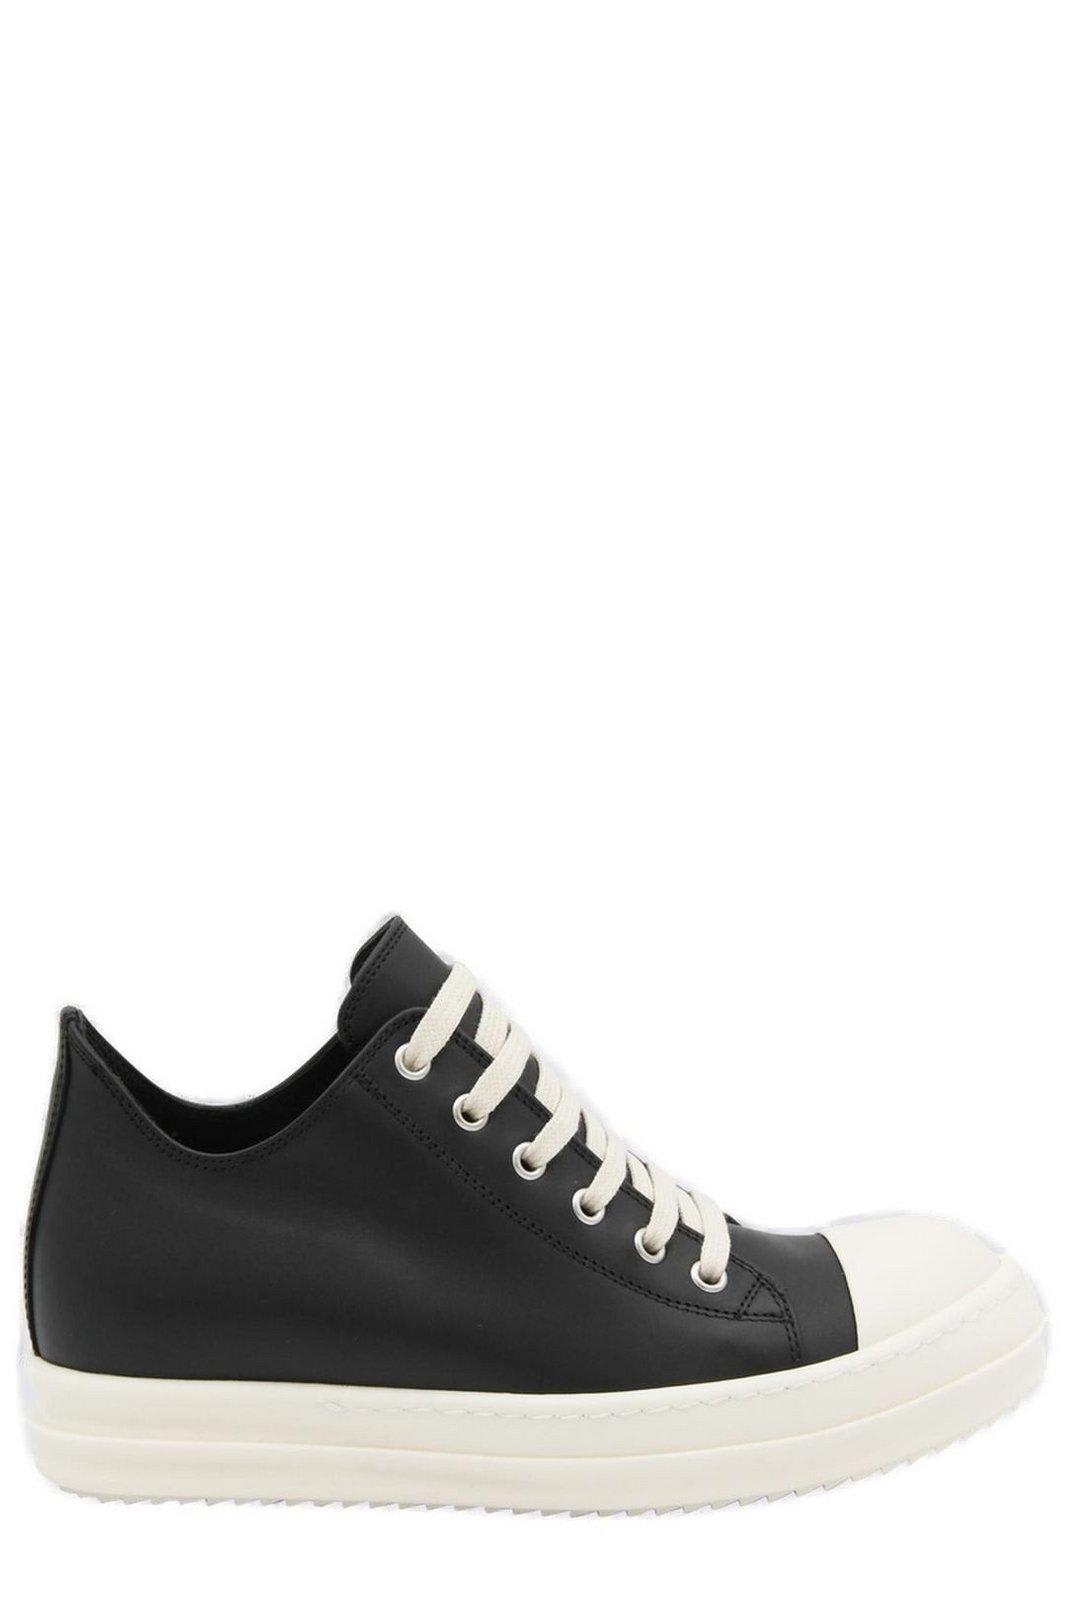 Rick Owens Round Toe Lace-up Sneakers